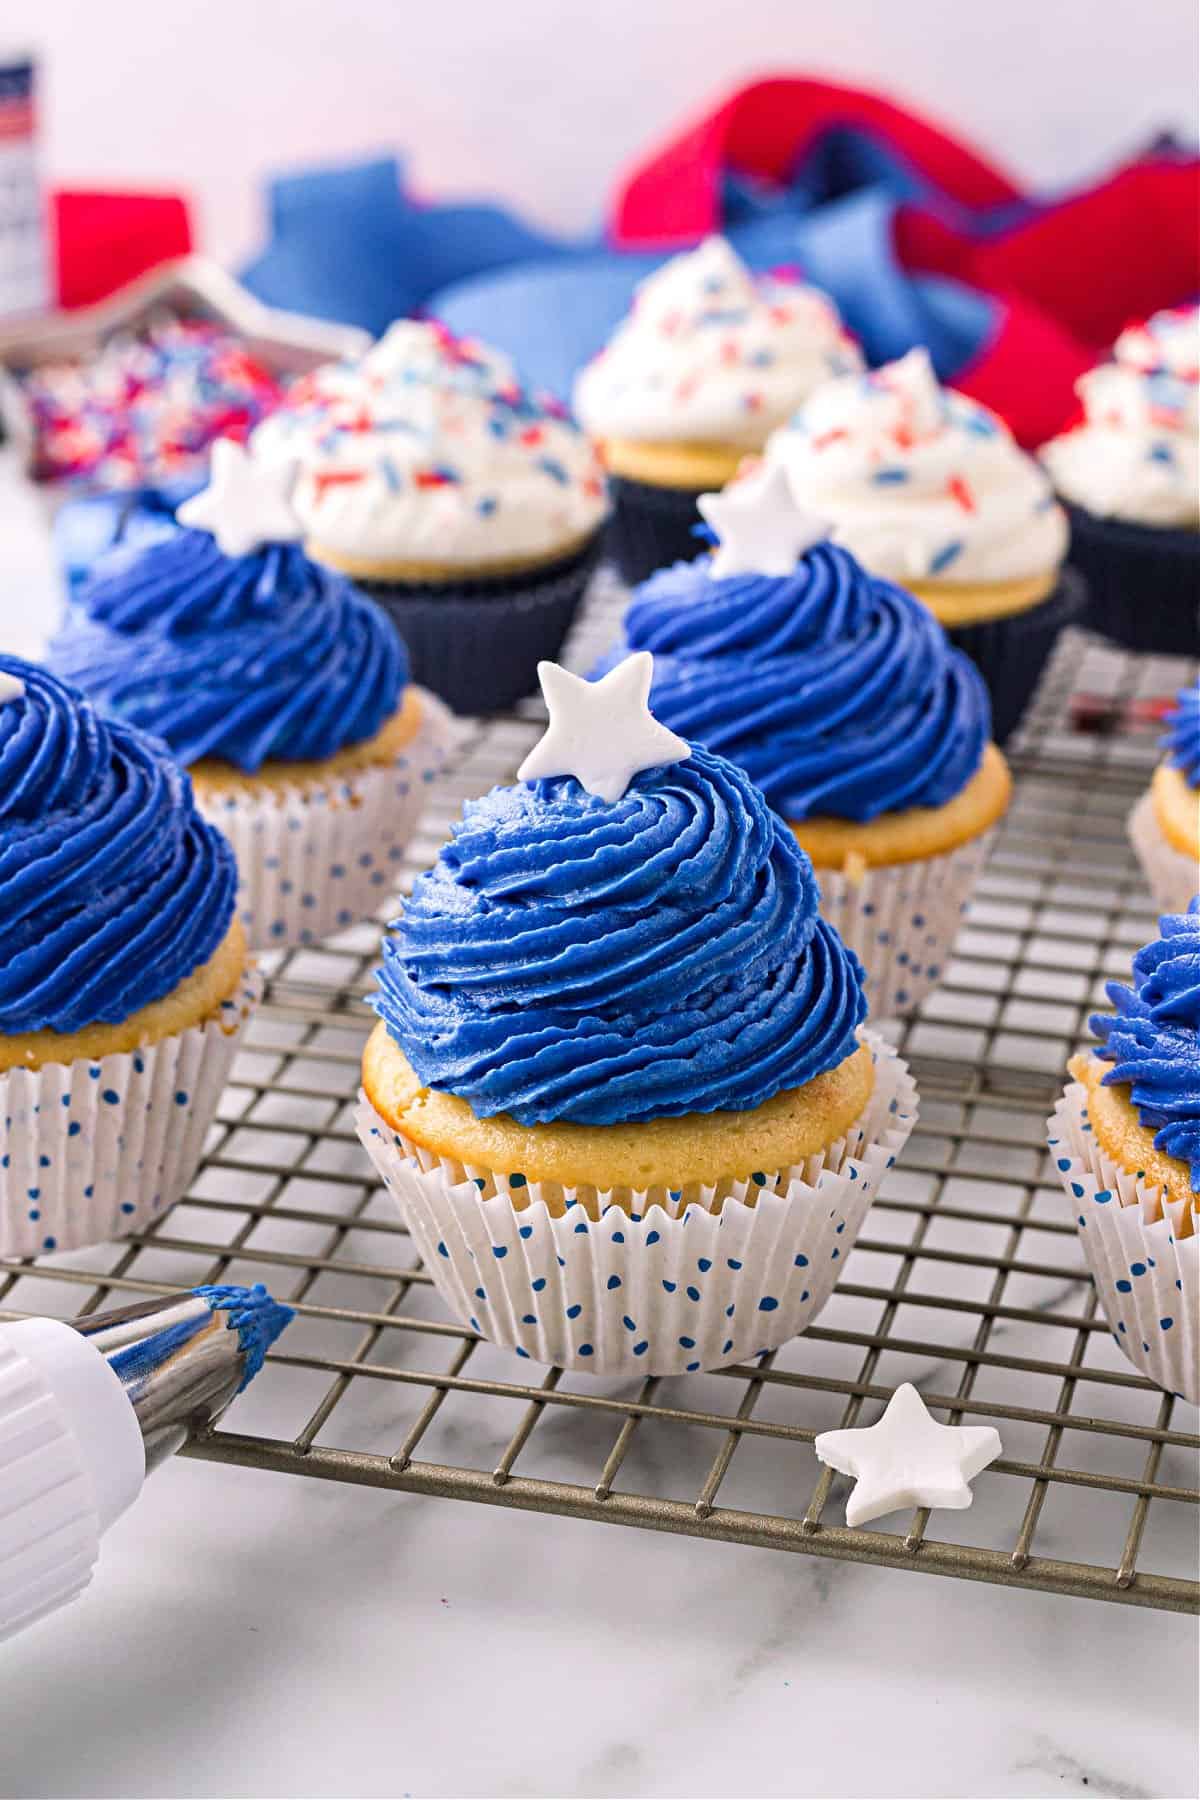 Red, White and Blue Cupcakes with Sprinkles and M&Ms in the Center